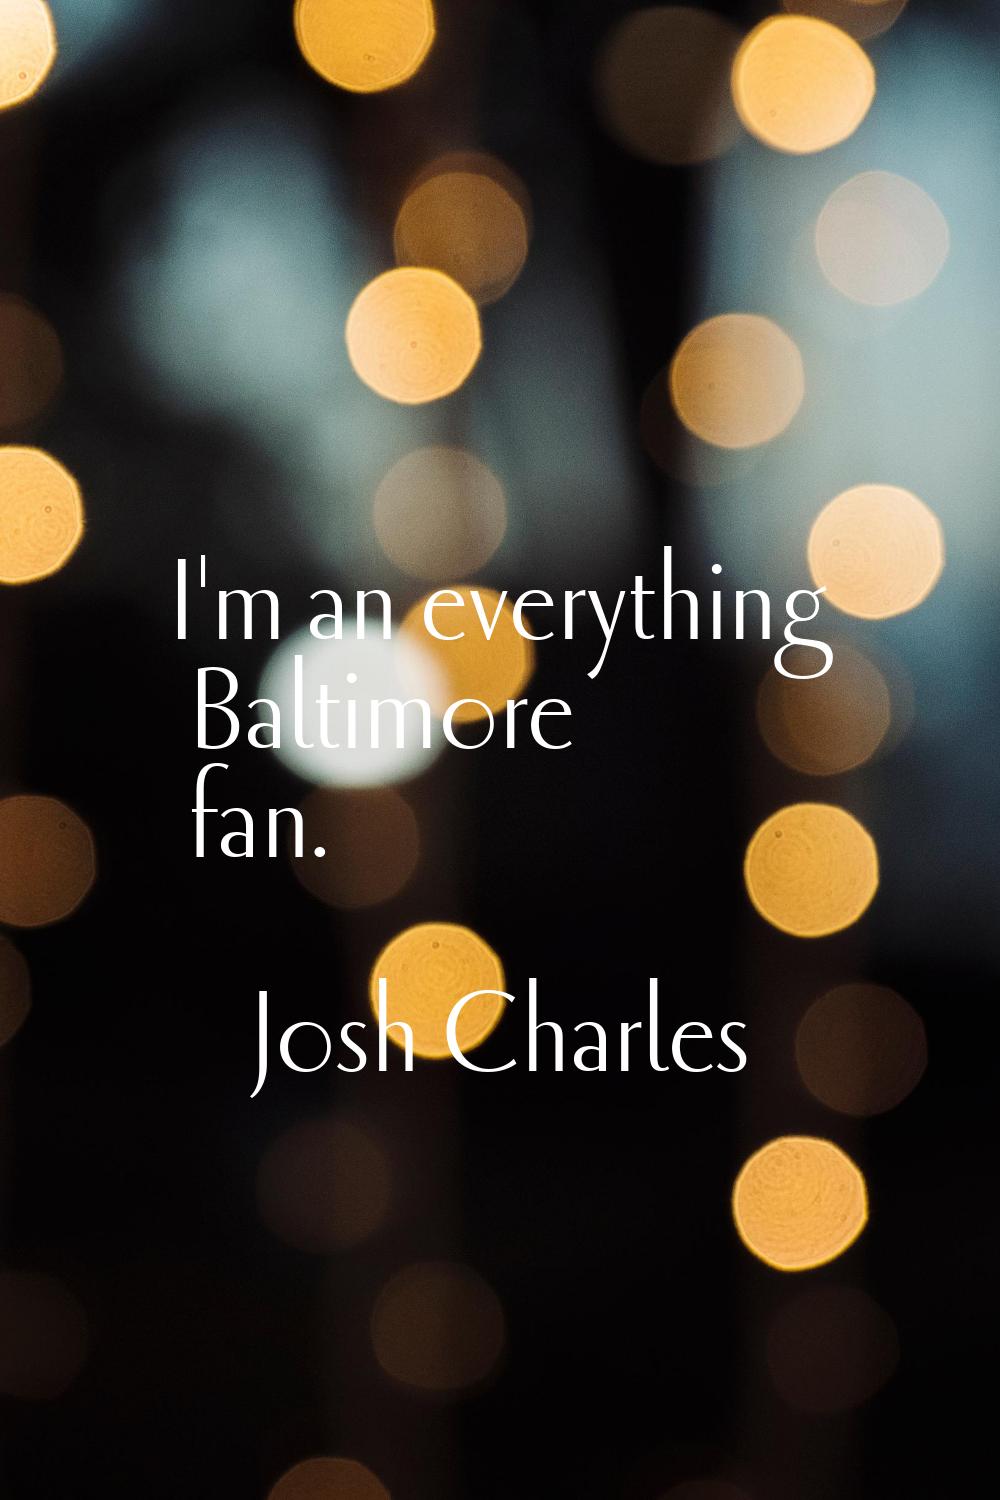 I'm an everything Baltimore fan.